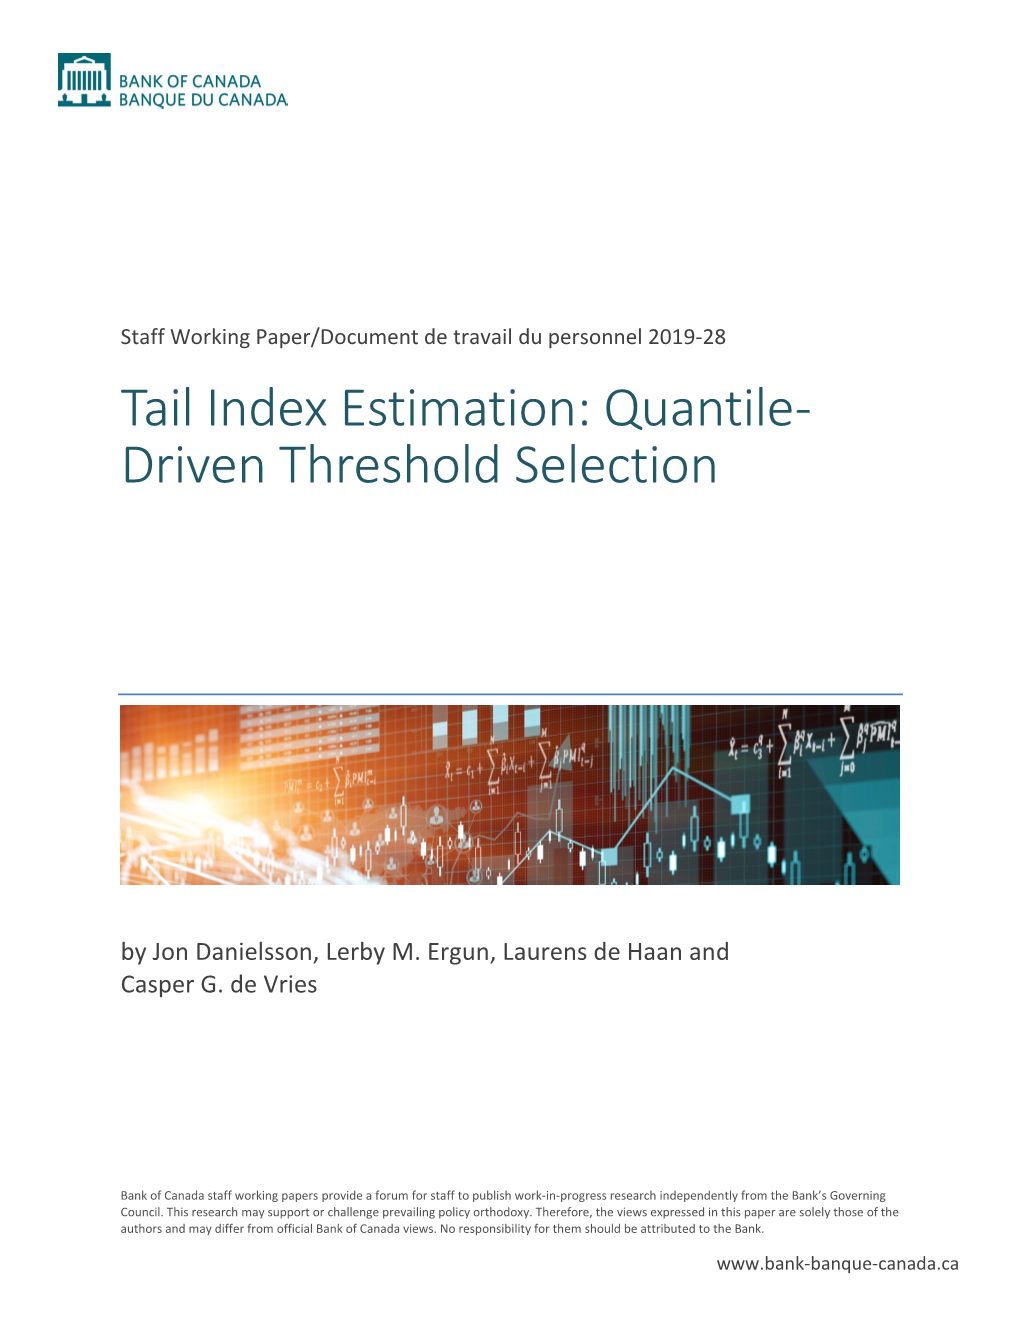 Tail Index Estimation: Quantile-Driven Threshold Selection